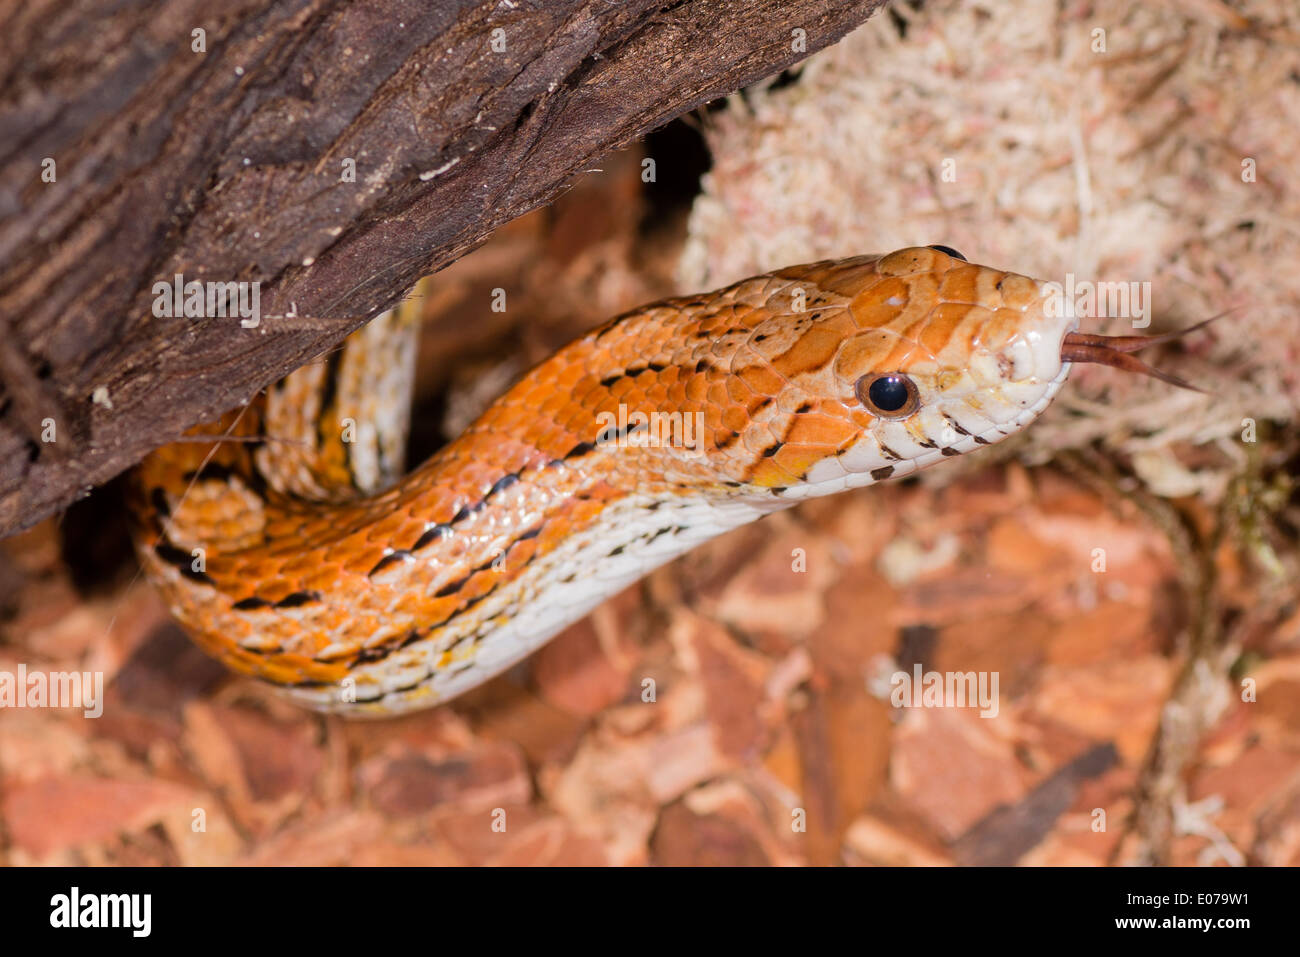 A Red Corn Snake smelling for food Stock Photo